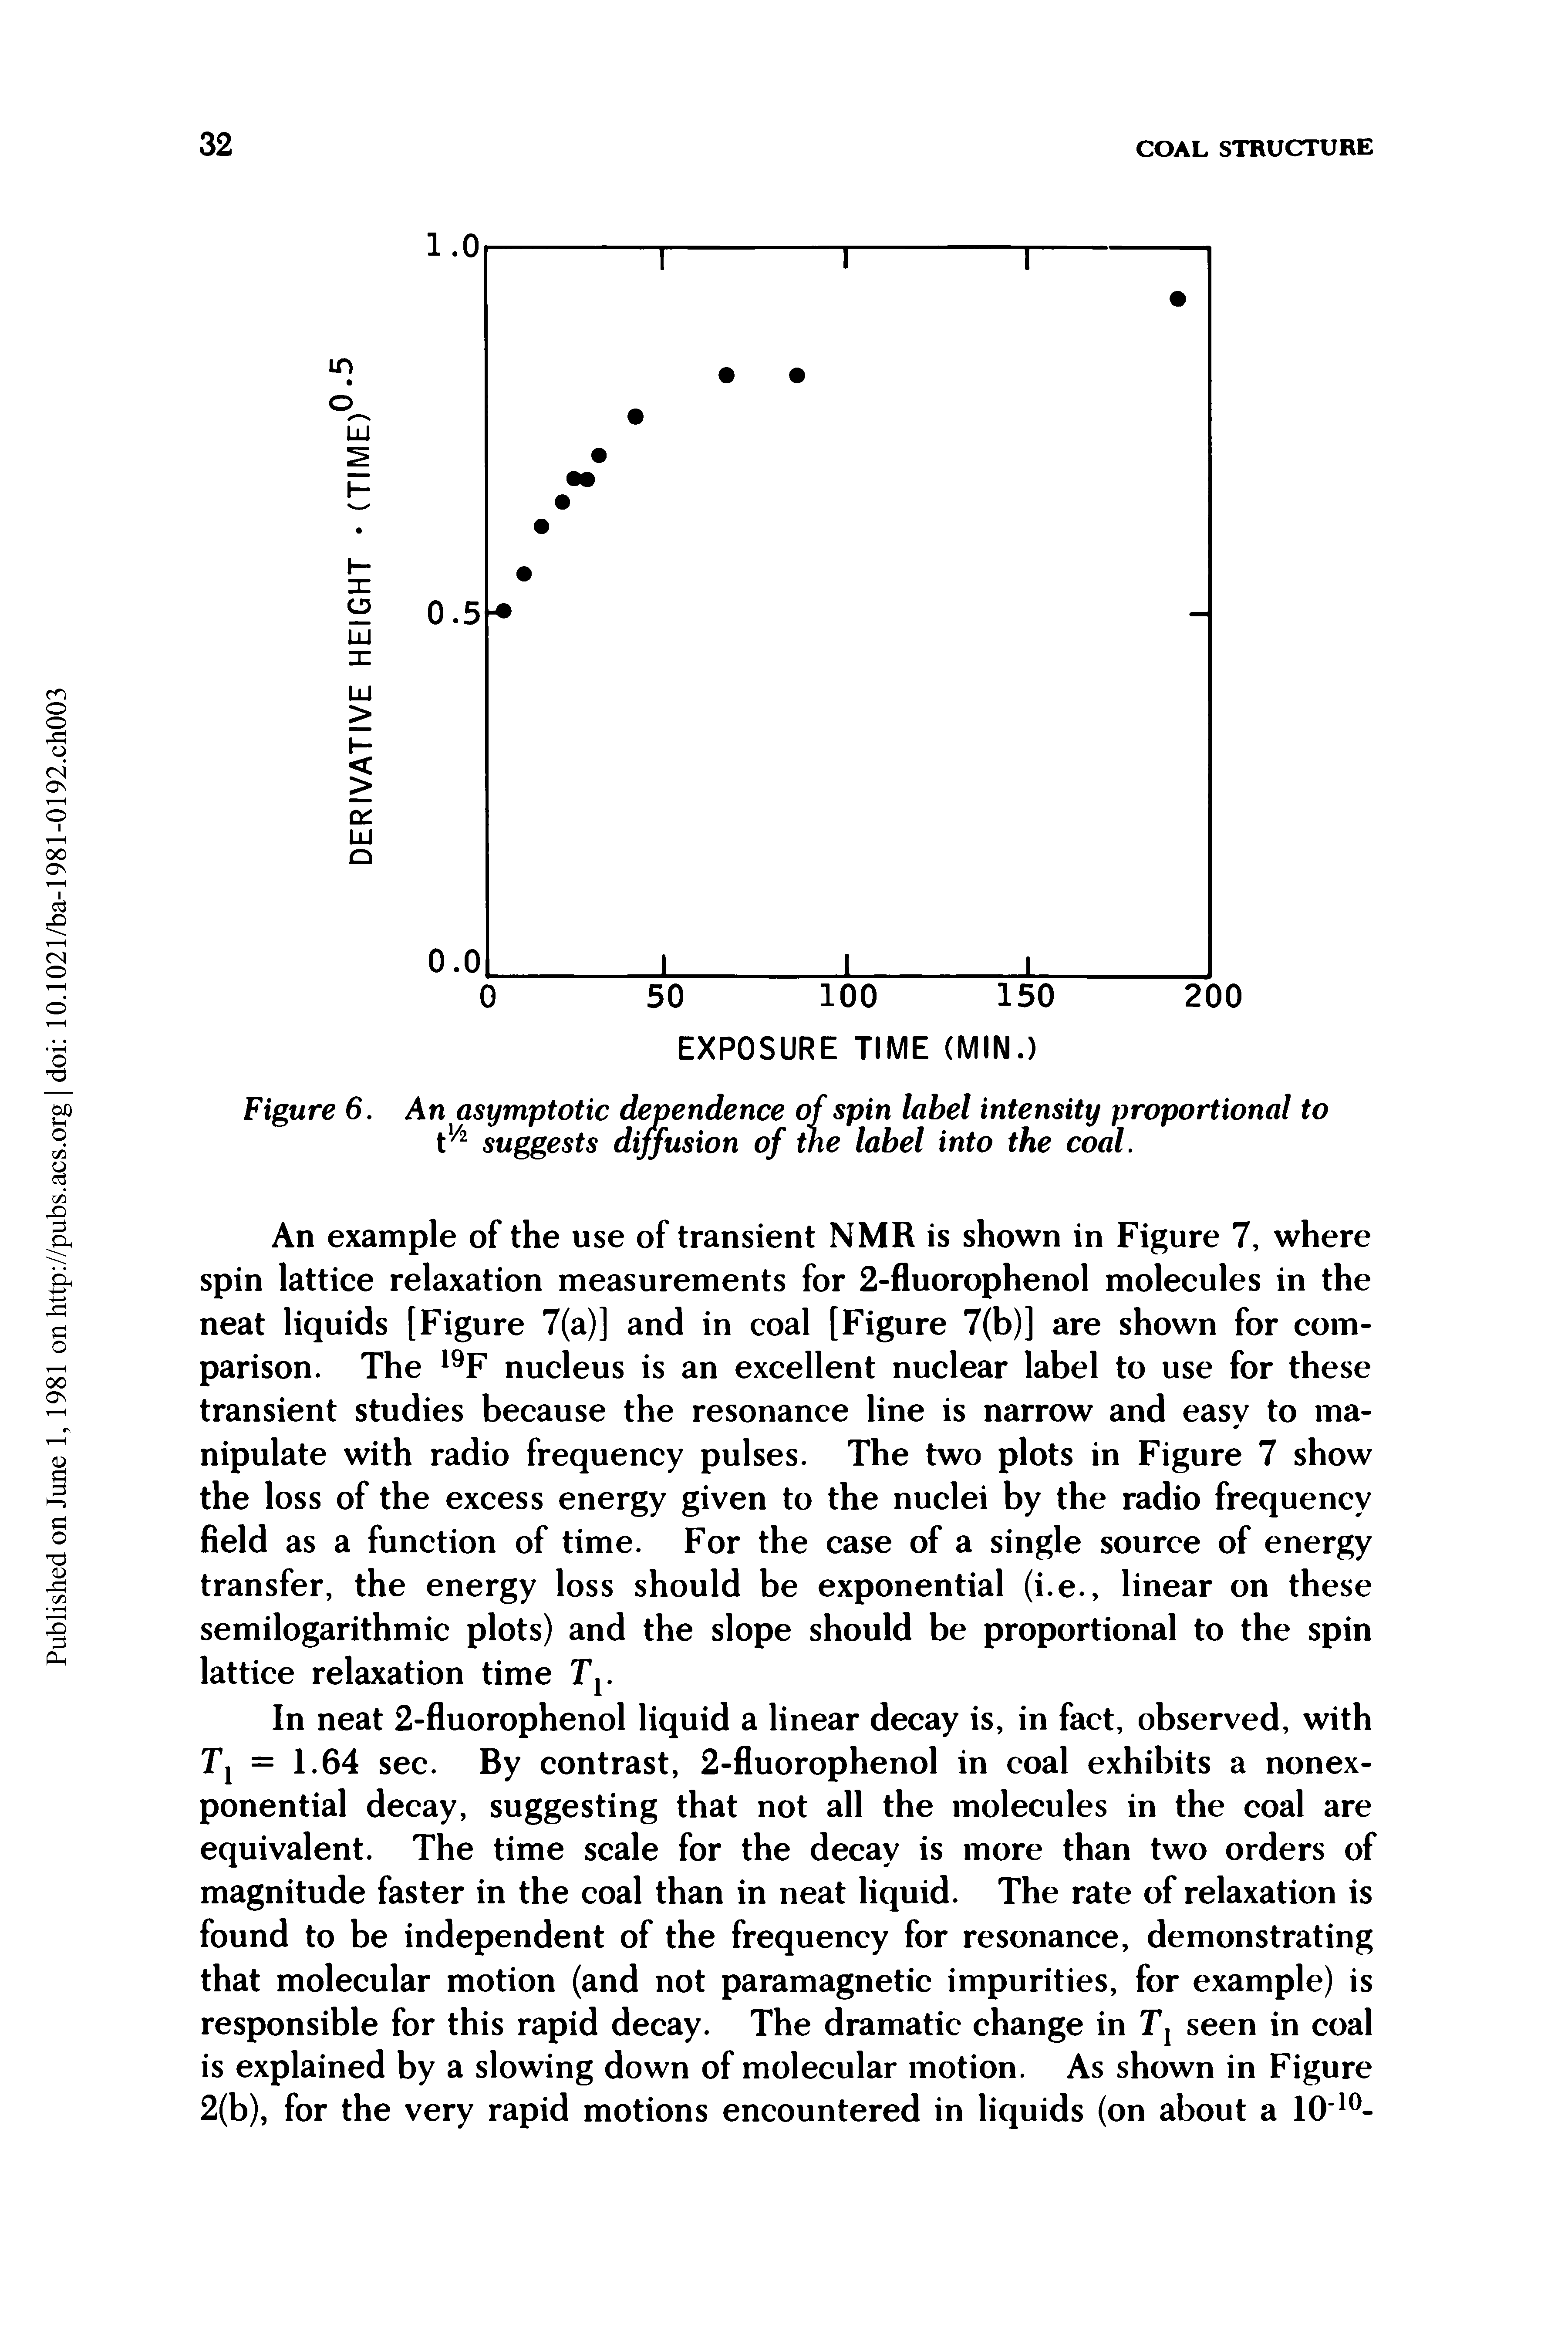 Figure 6. An asymptotic dependence of spin label intensity proportional to suggests diffusion of the label into the coal.